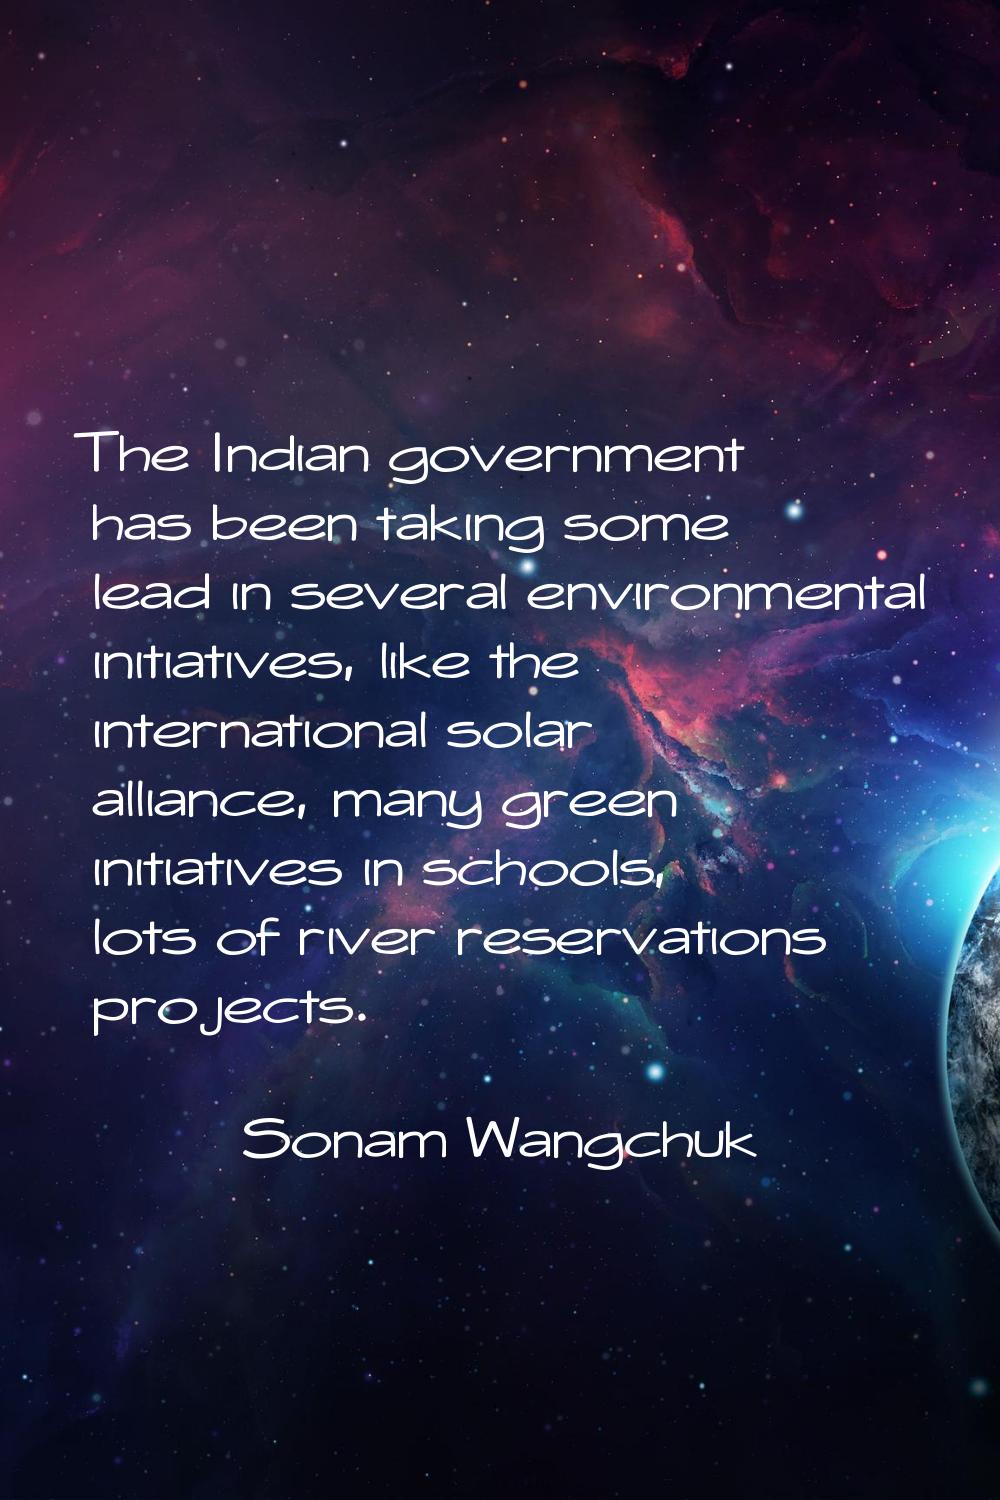 The Indian government has been taking some lead in several environmental initiatives, like the inte